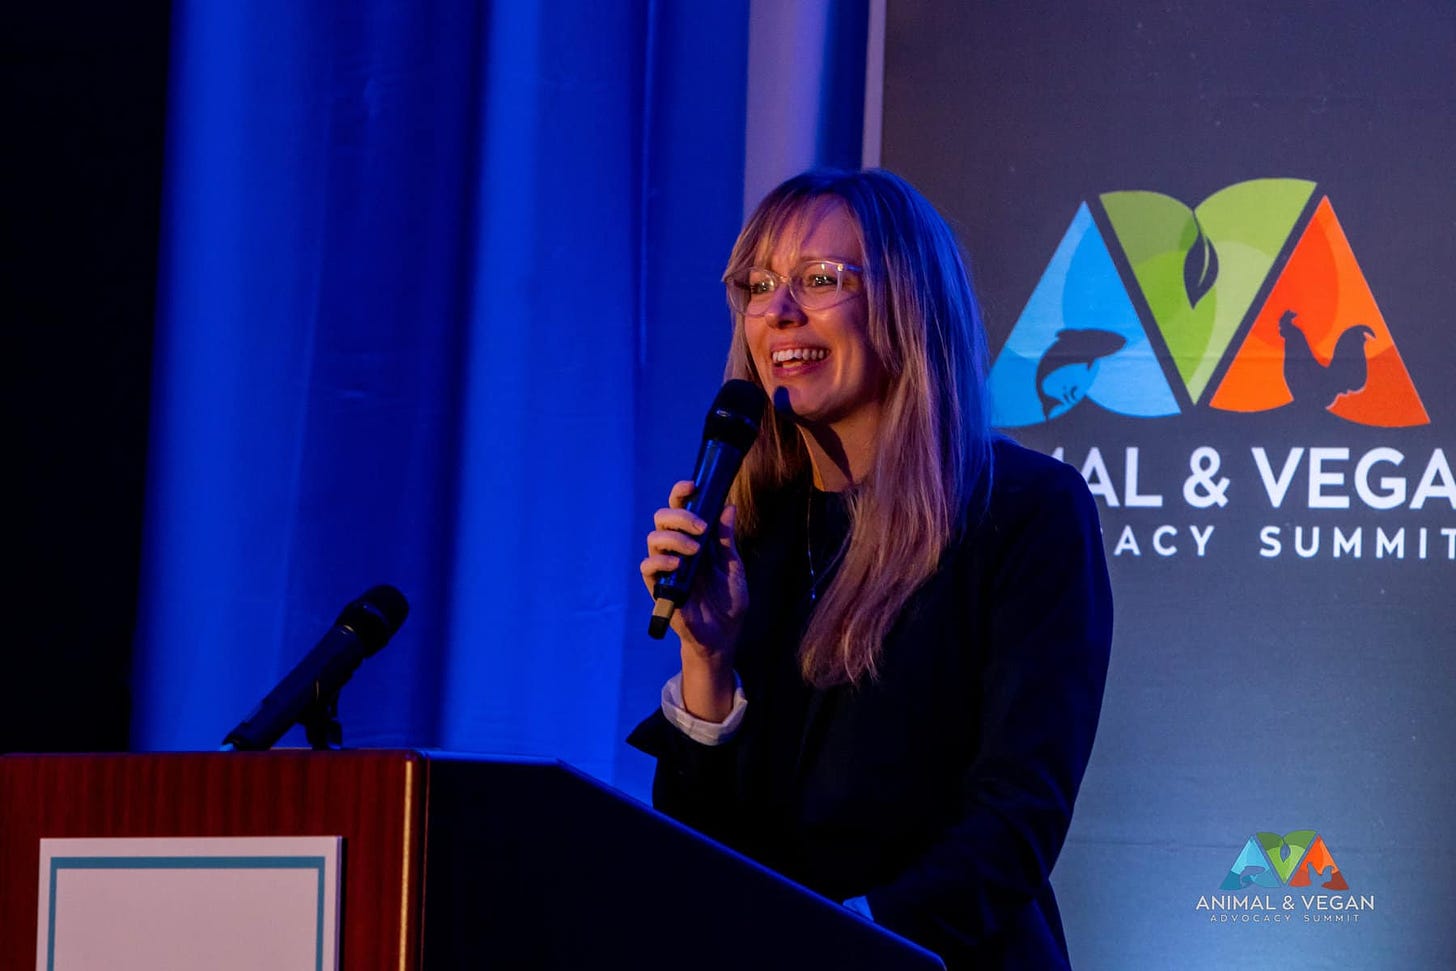 Global Leaders in Vegan Advocacy Unite in DC for ‘World’s Largest’ Animal Rights Conference - vegconomist -